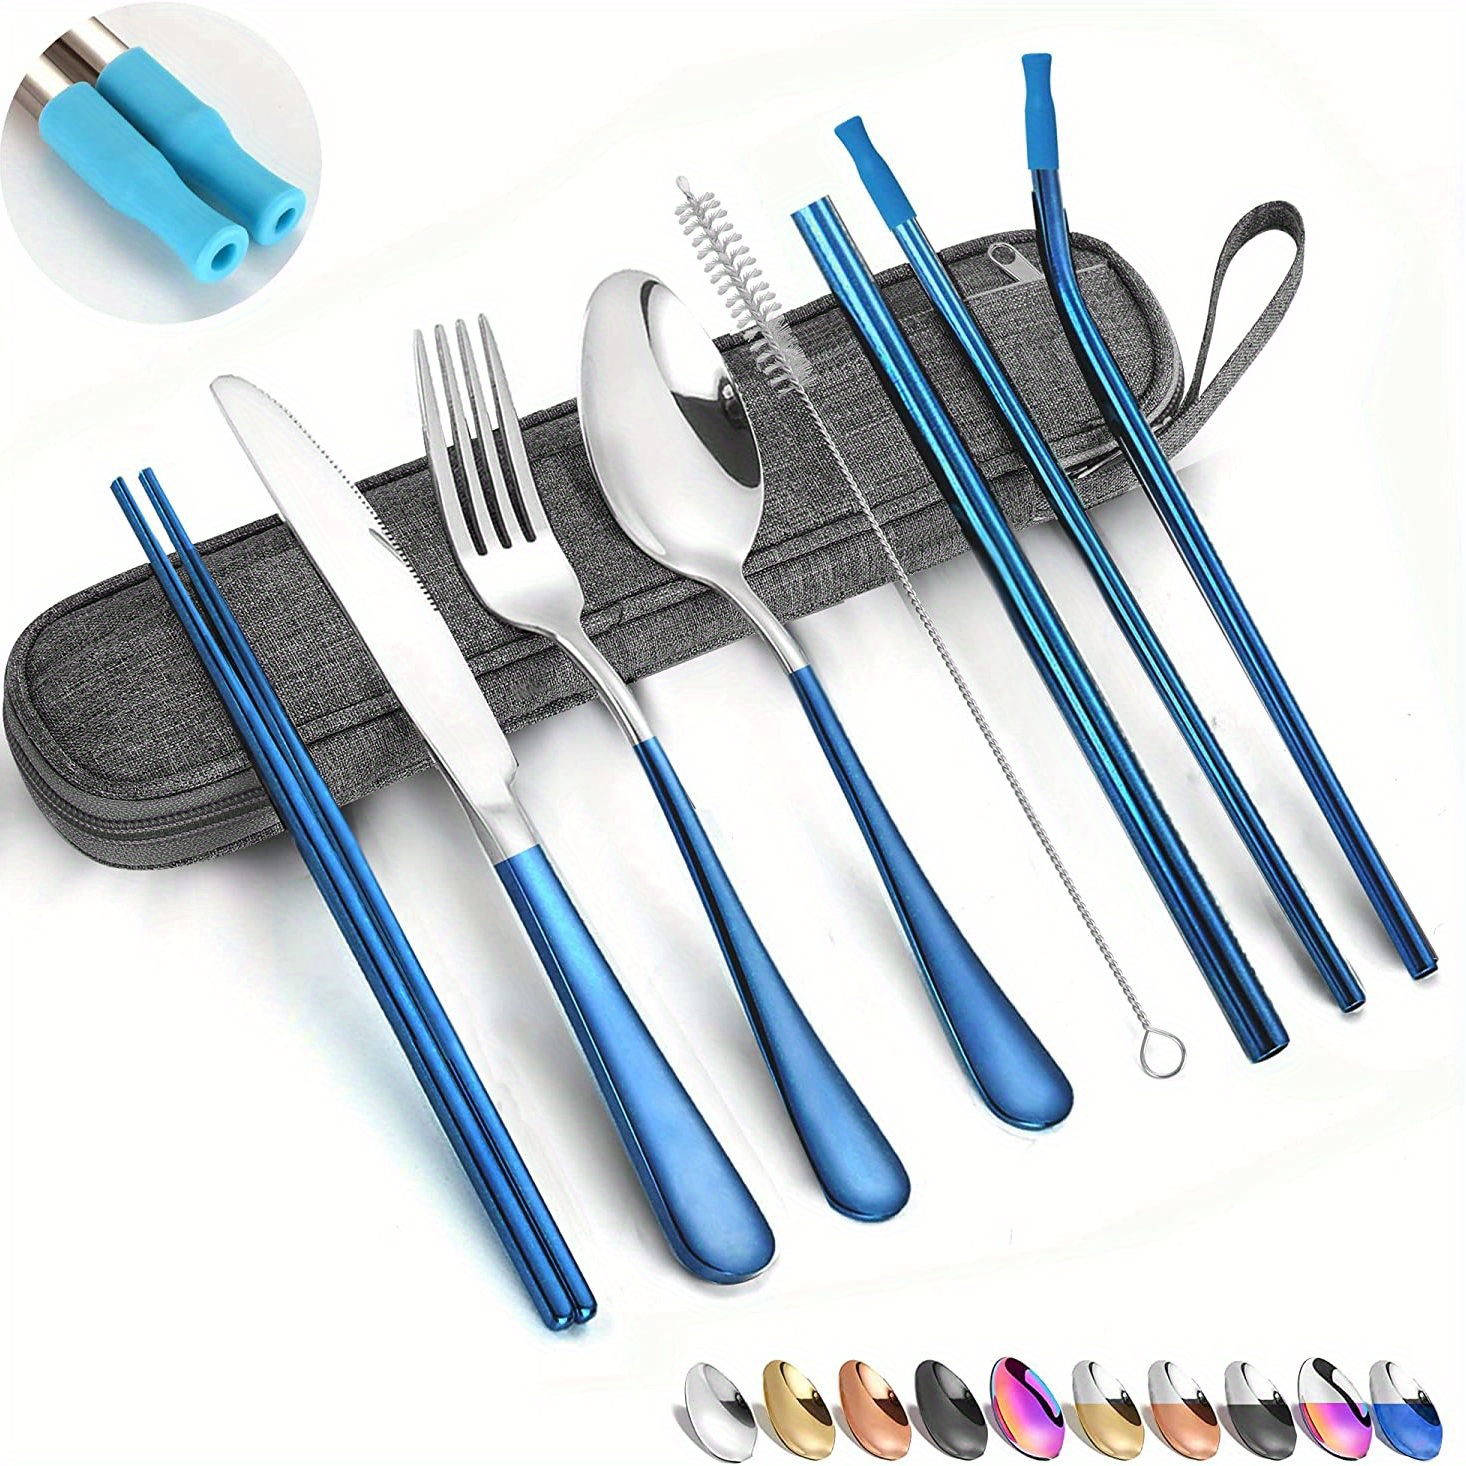 Portable Travel Utensils Set with Case, Stainless